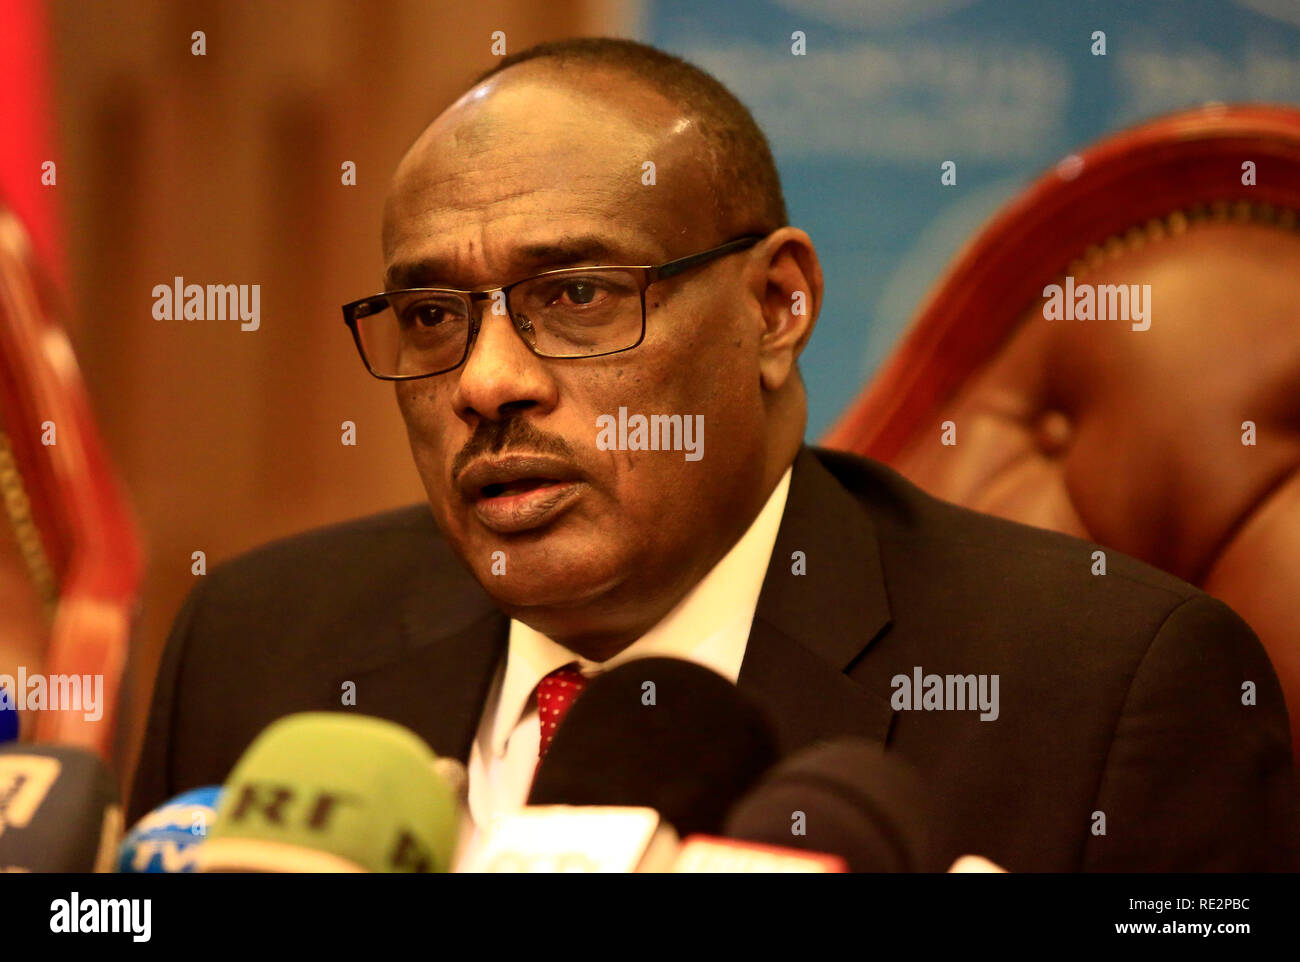 Khartoum, Sudan. 19th Jan, 2019. Sudanese Foreign Minister Al-Dirdiri Mohamed Ahmed speaks at a press conference in Khartoum, capital of Sudan, on Jan. 19, 2019. The Sudanese government on Saturday announced that another round of peace talks between the Central African Republic (CAR) government and 14 opposition factions will be held in Khartoum next week. Credit: Mohamed Khidir/Xinhua/Alamy Live News Stock Photo